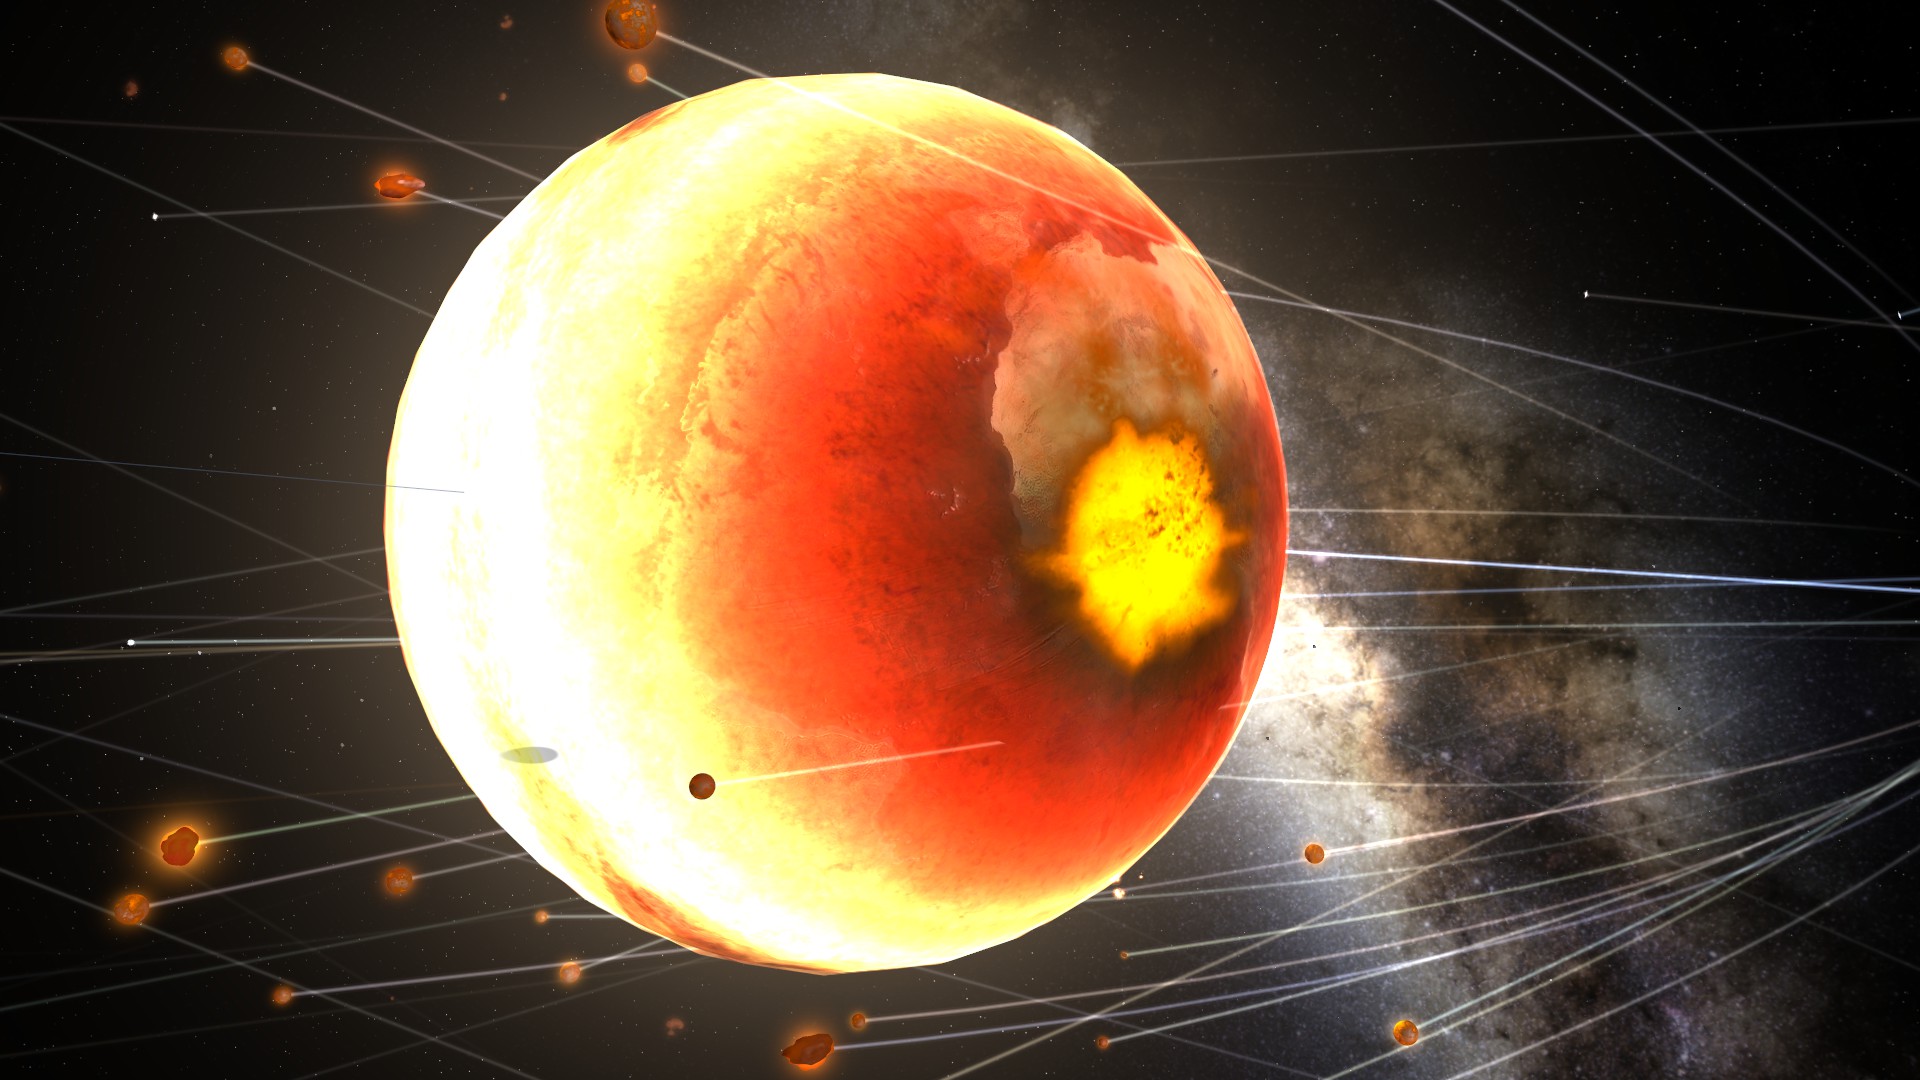 us_-heated-planet-after-collision.jpg